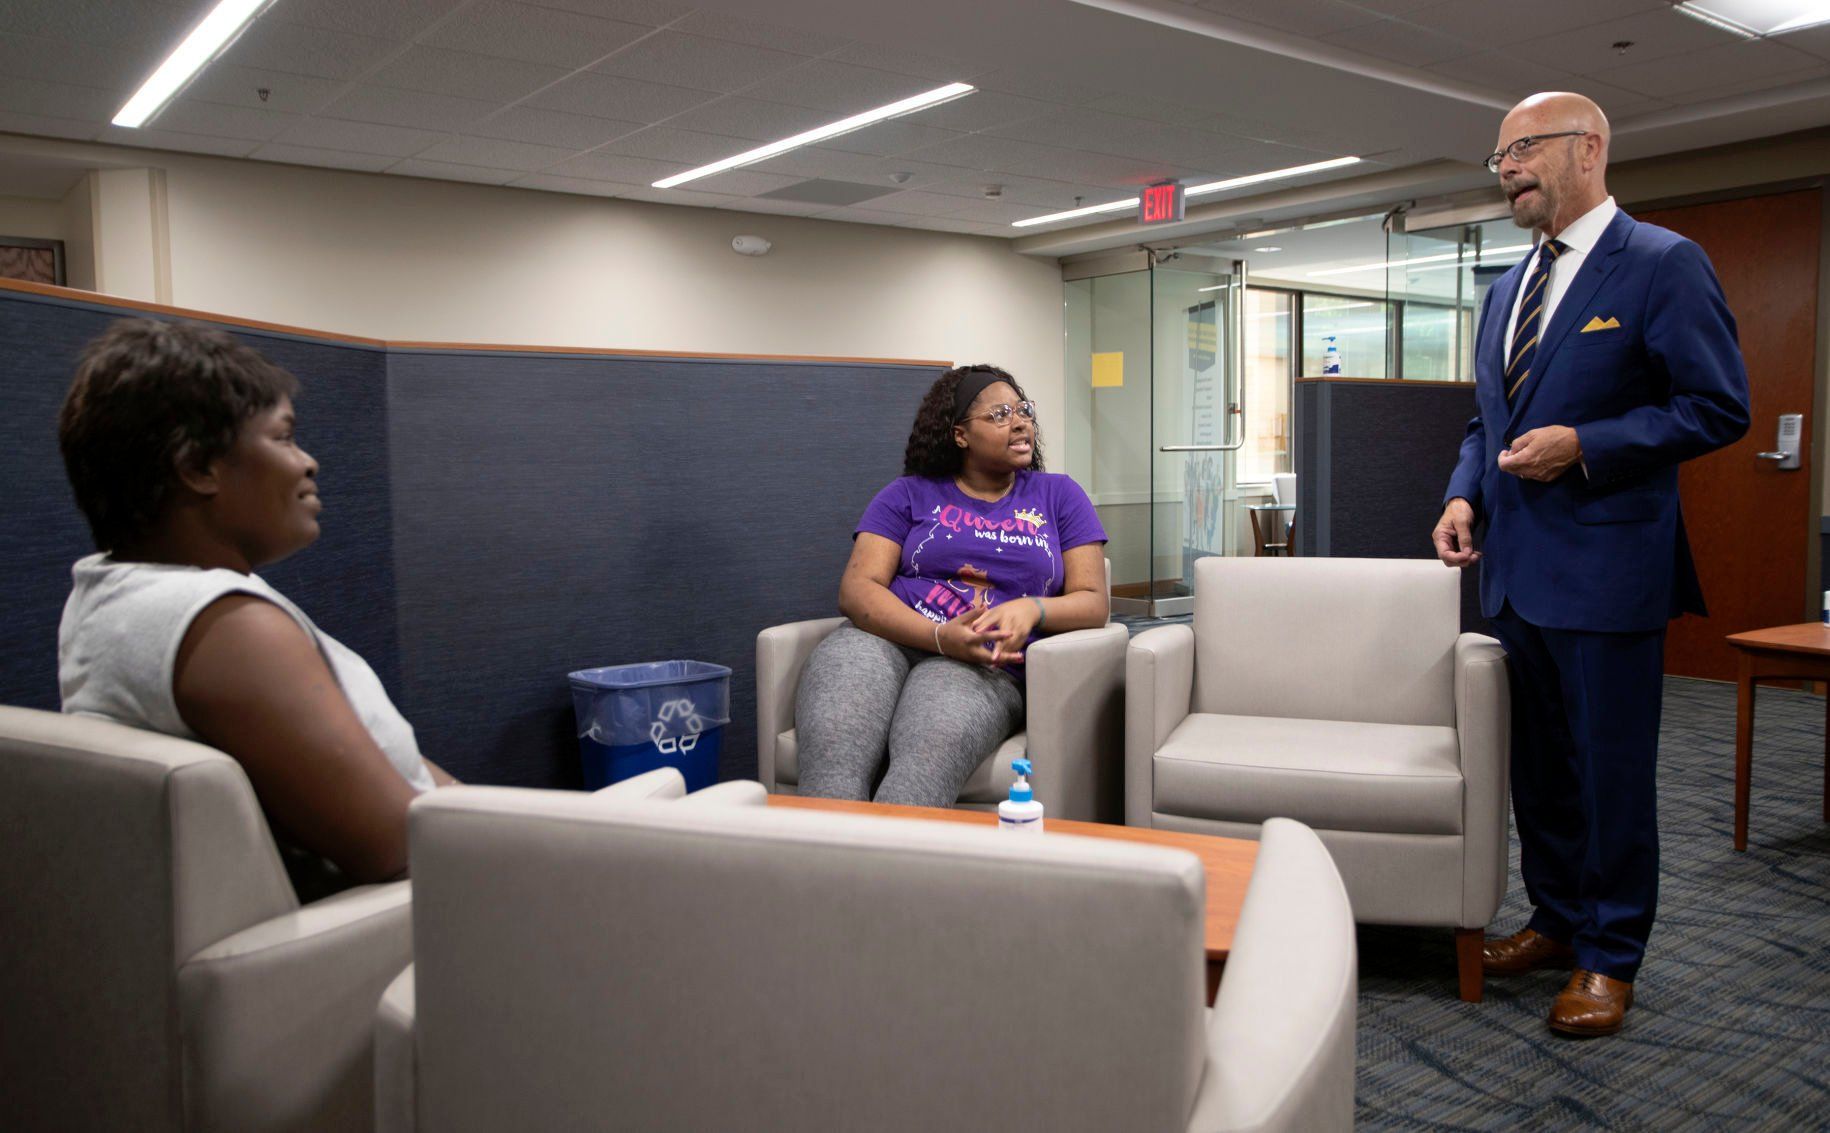 Herbert Riedel speaks with students Yolanda McDougal (left) and Breonna Doss at the Dubuque campus.    PHOTO CREDIT: Stephen Gassman